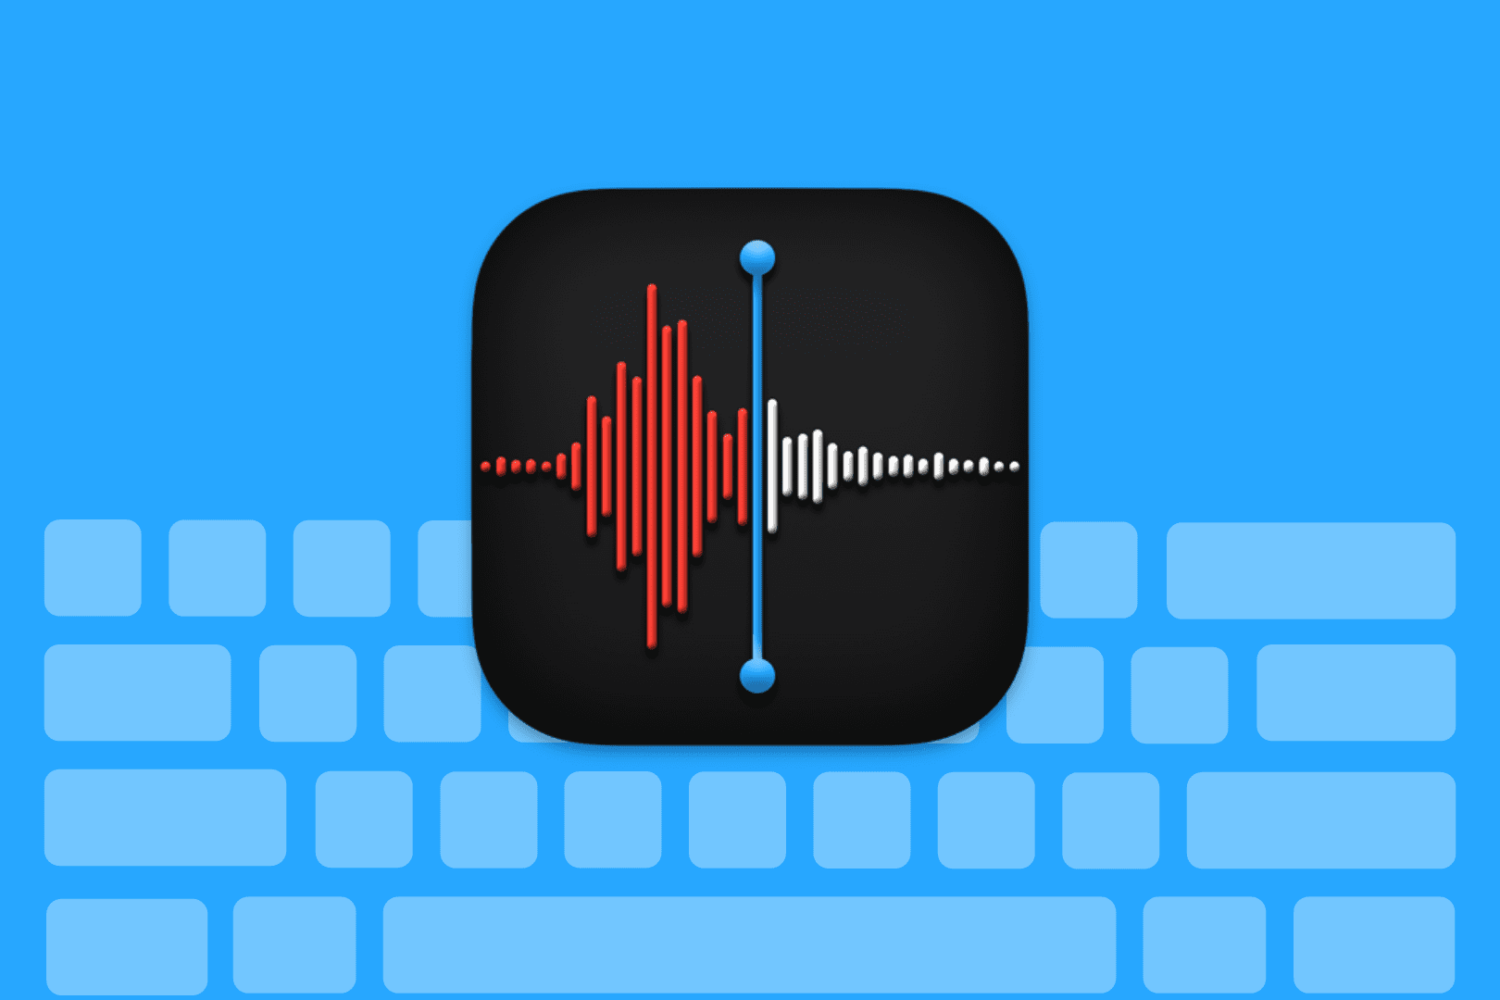 Keyboard shortcuts for Voice Memos